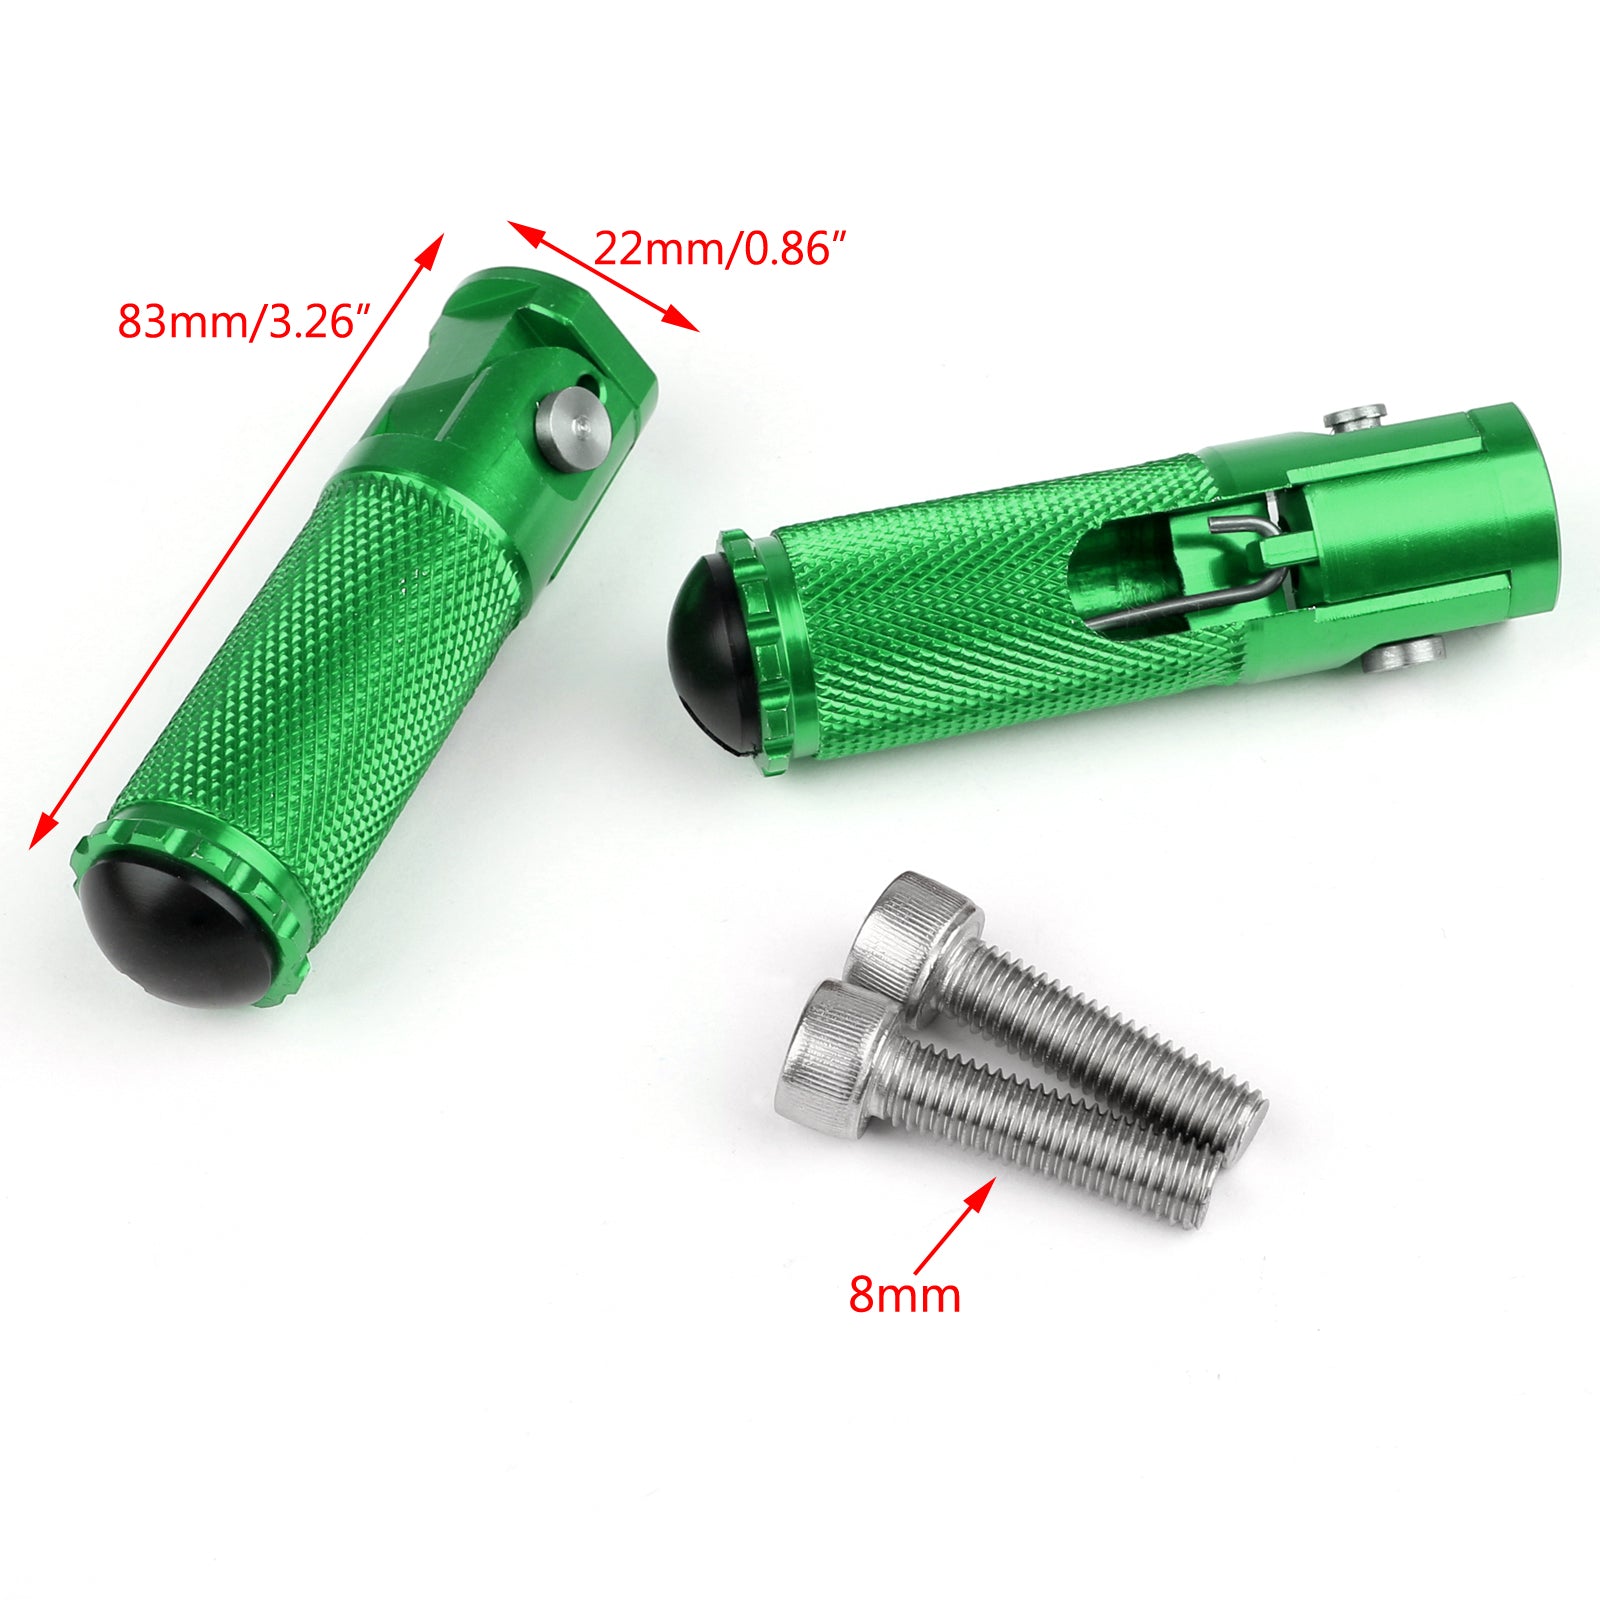 CNC Folding Foot Pegs Footpeg Rear Set Rest Racing For Universal Motorcycle